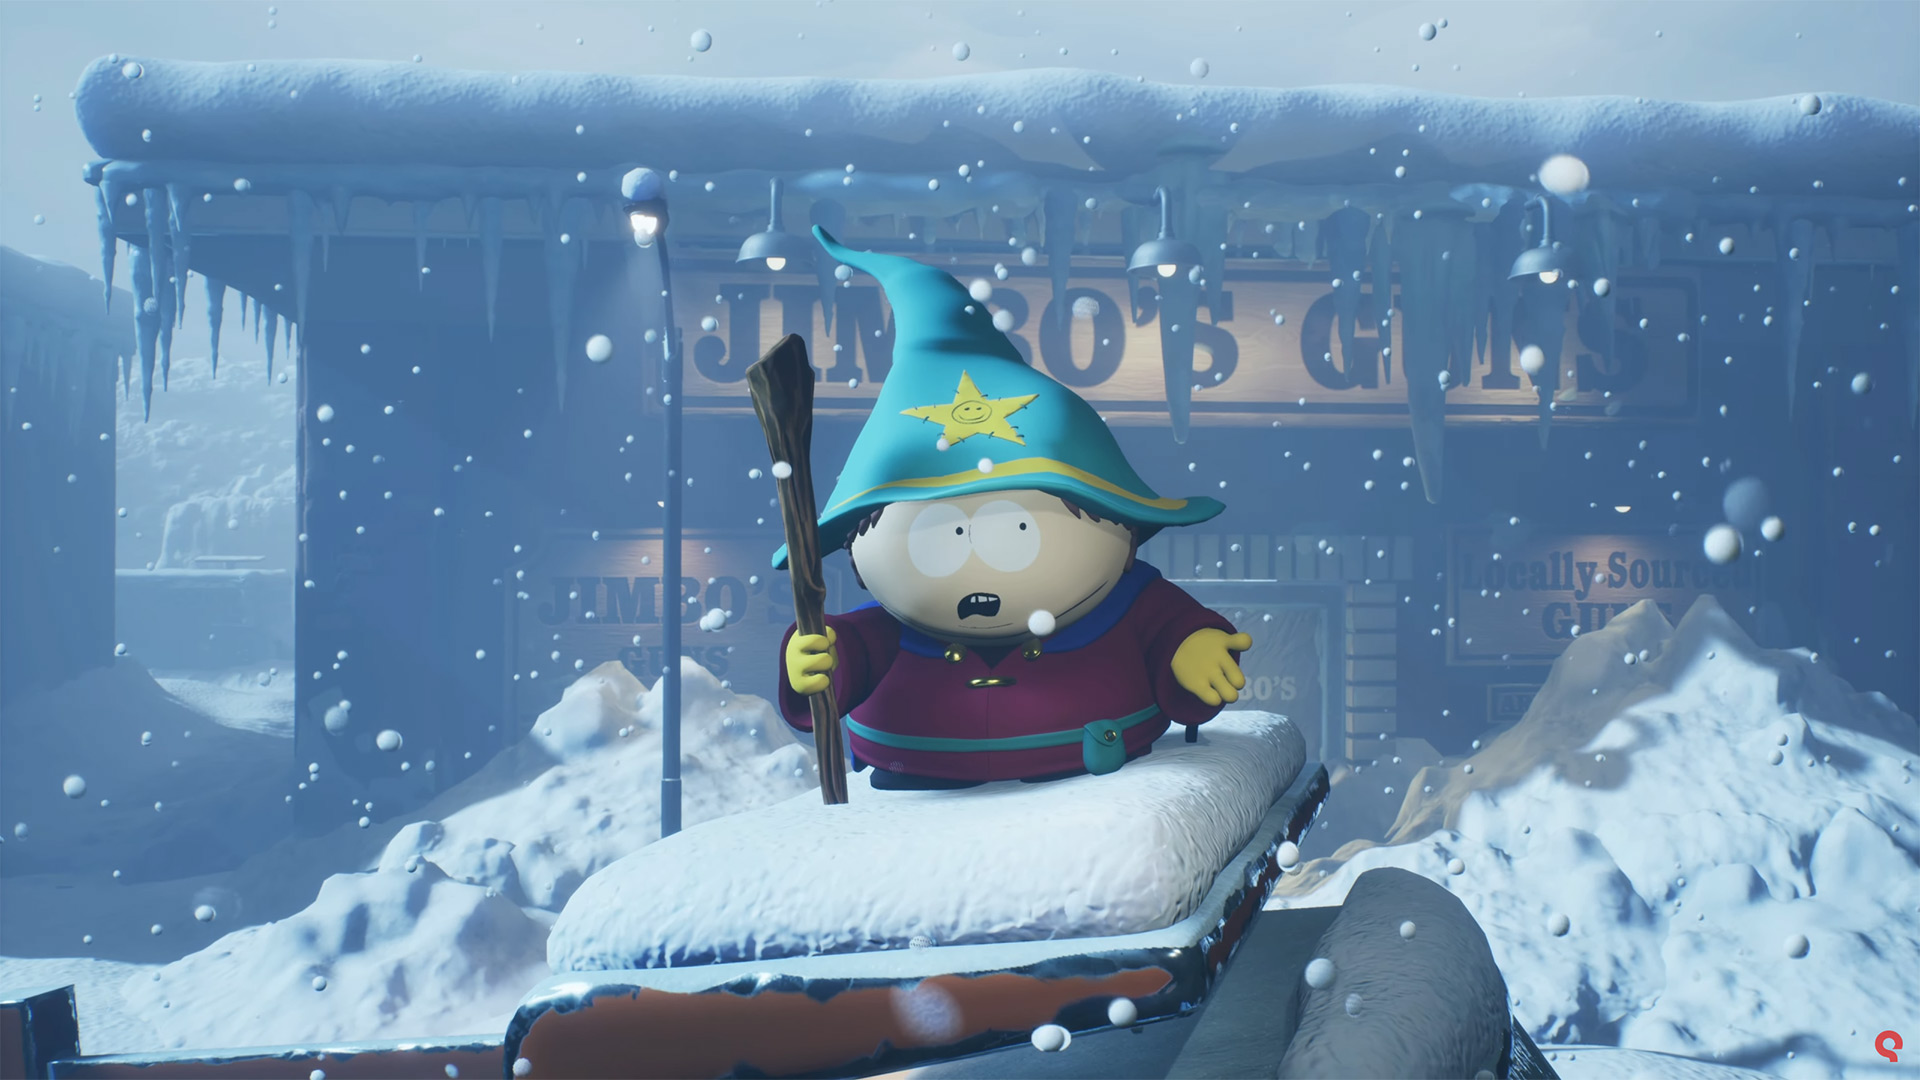 South Park: Snow Day! is launching sometime next year as a four-player co-op game